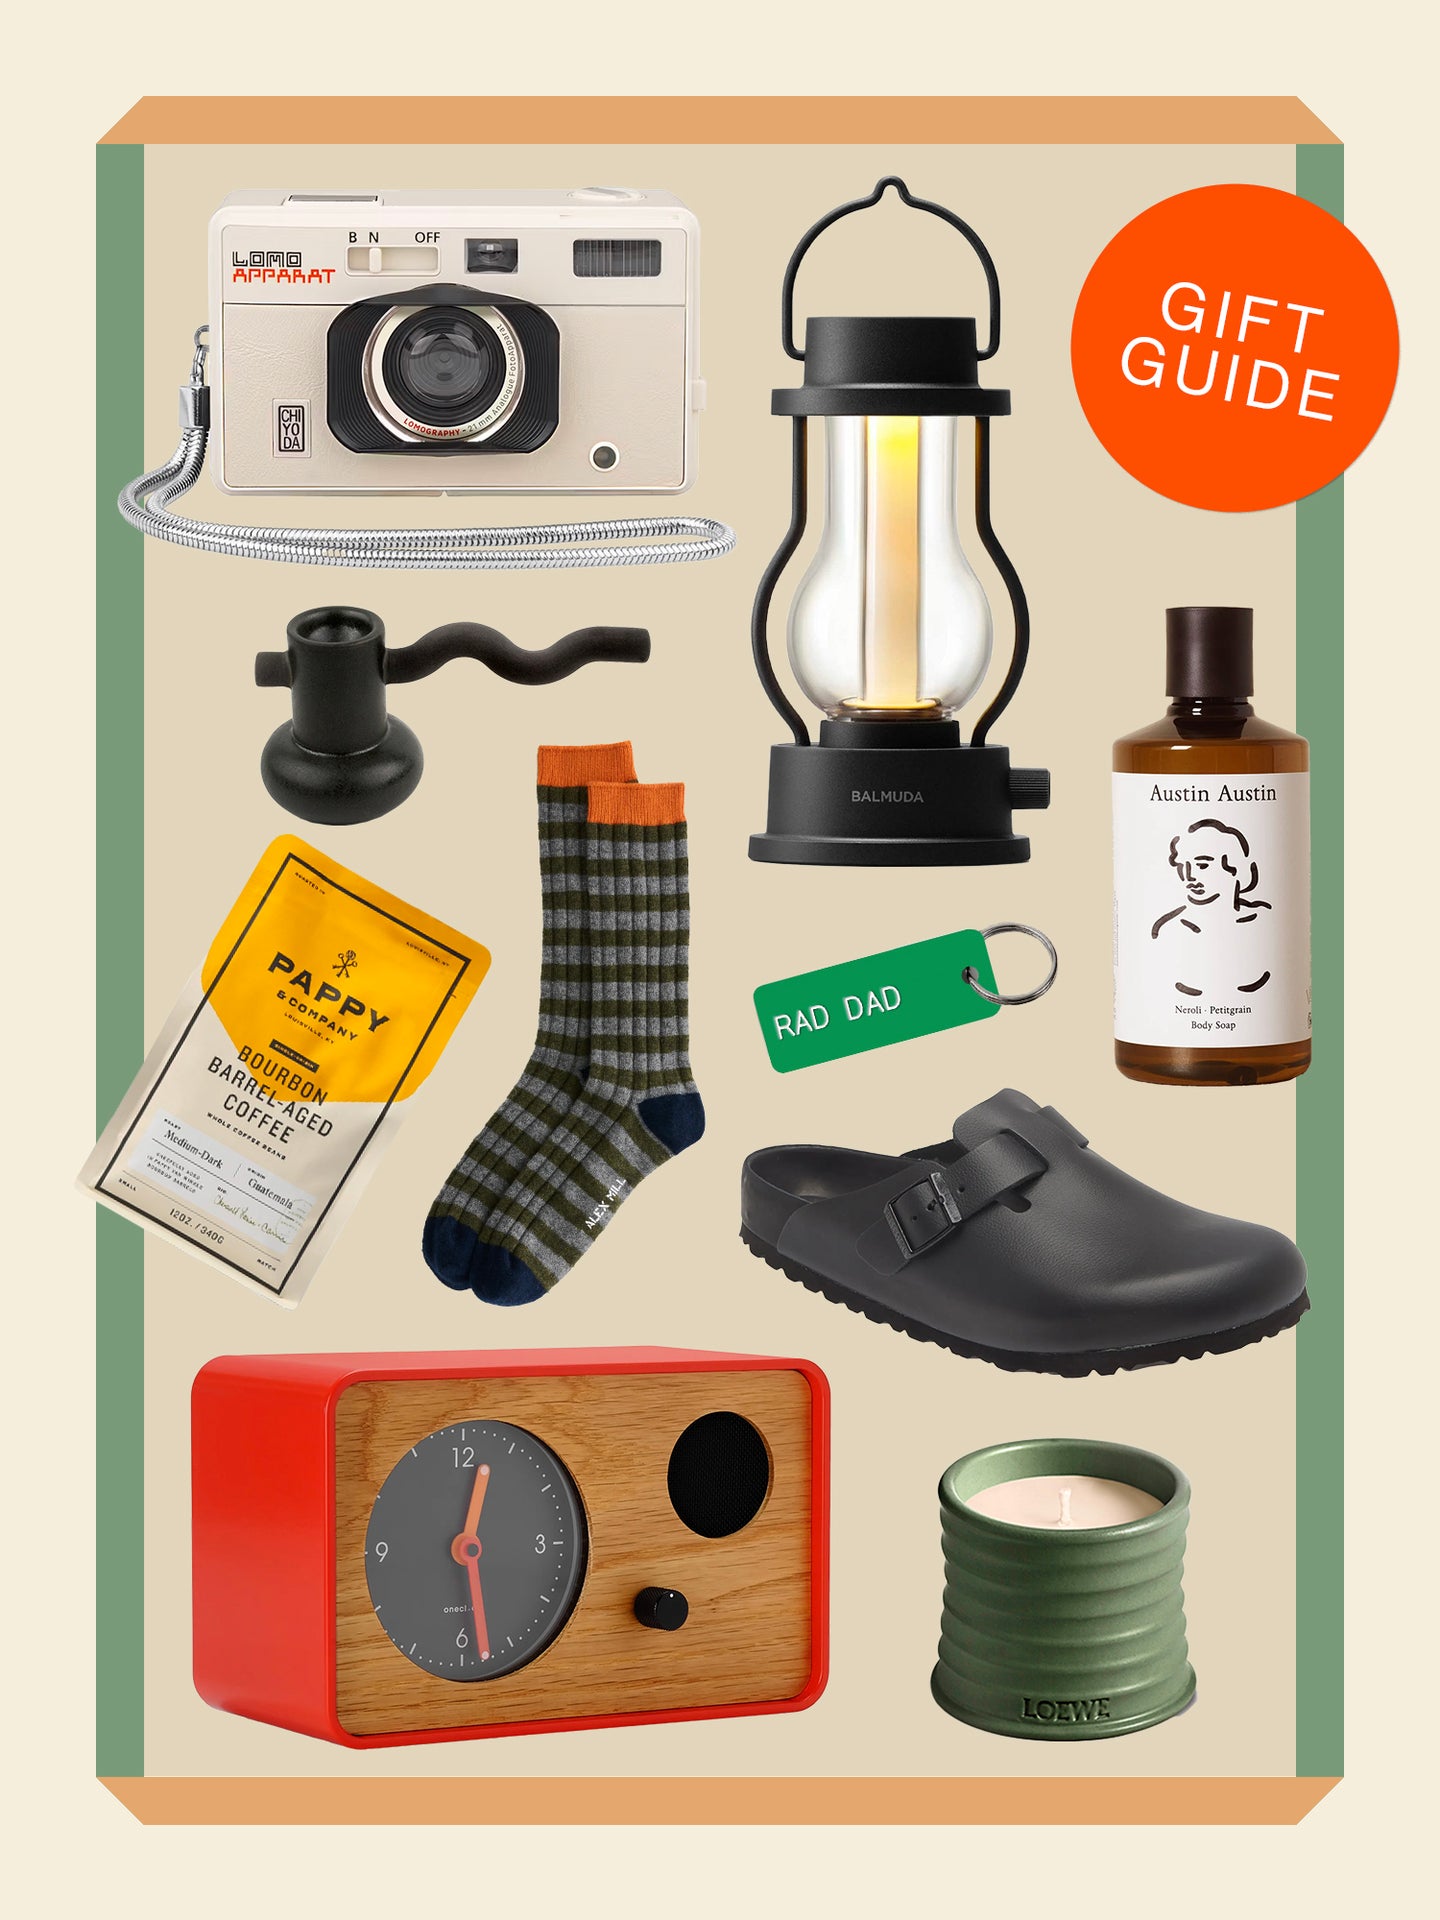 45 Great Gifts for Men That Play to Their Favorite Pursuits